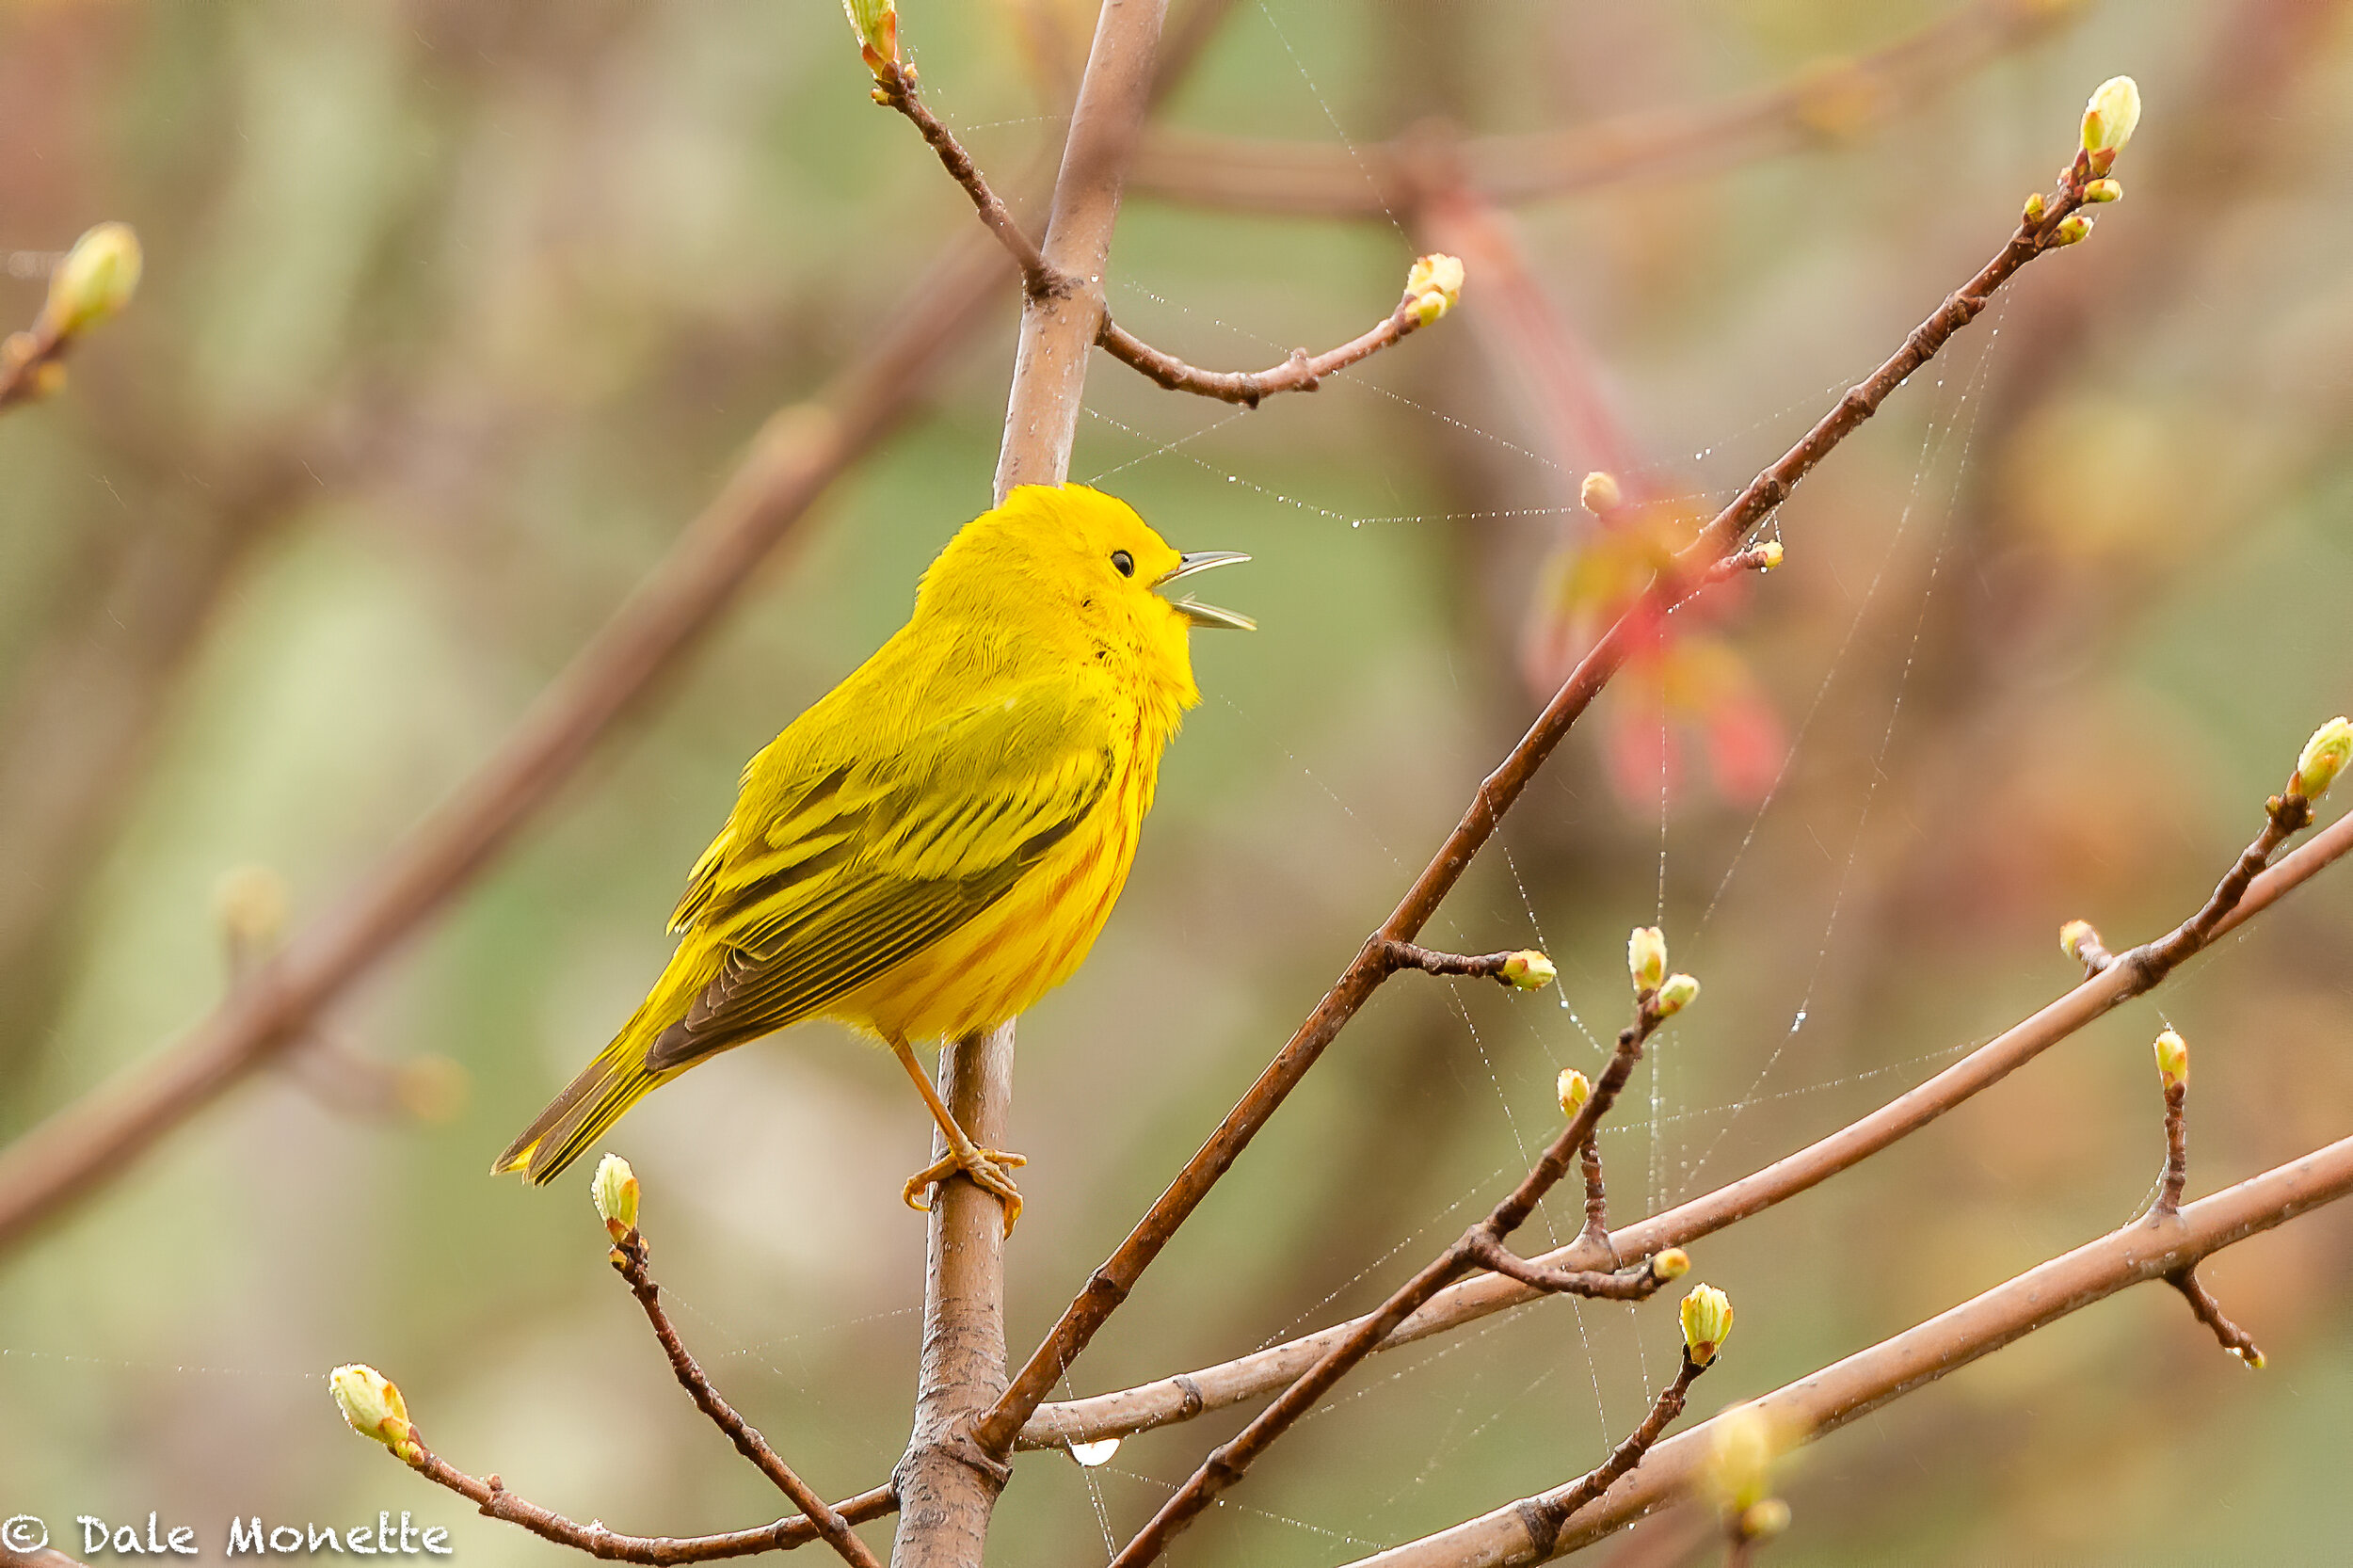   “Sweet sweet so sweet” is the call of the yellow warbler.  These birds are bright yellow and hard to miss along with their song and bright yellow color.  